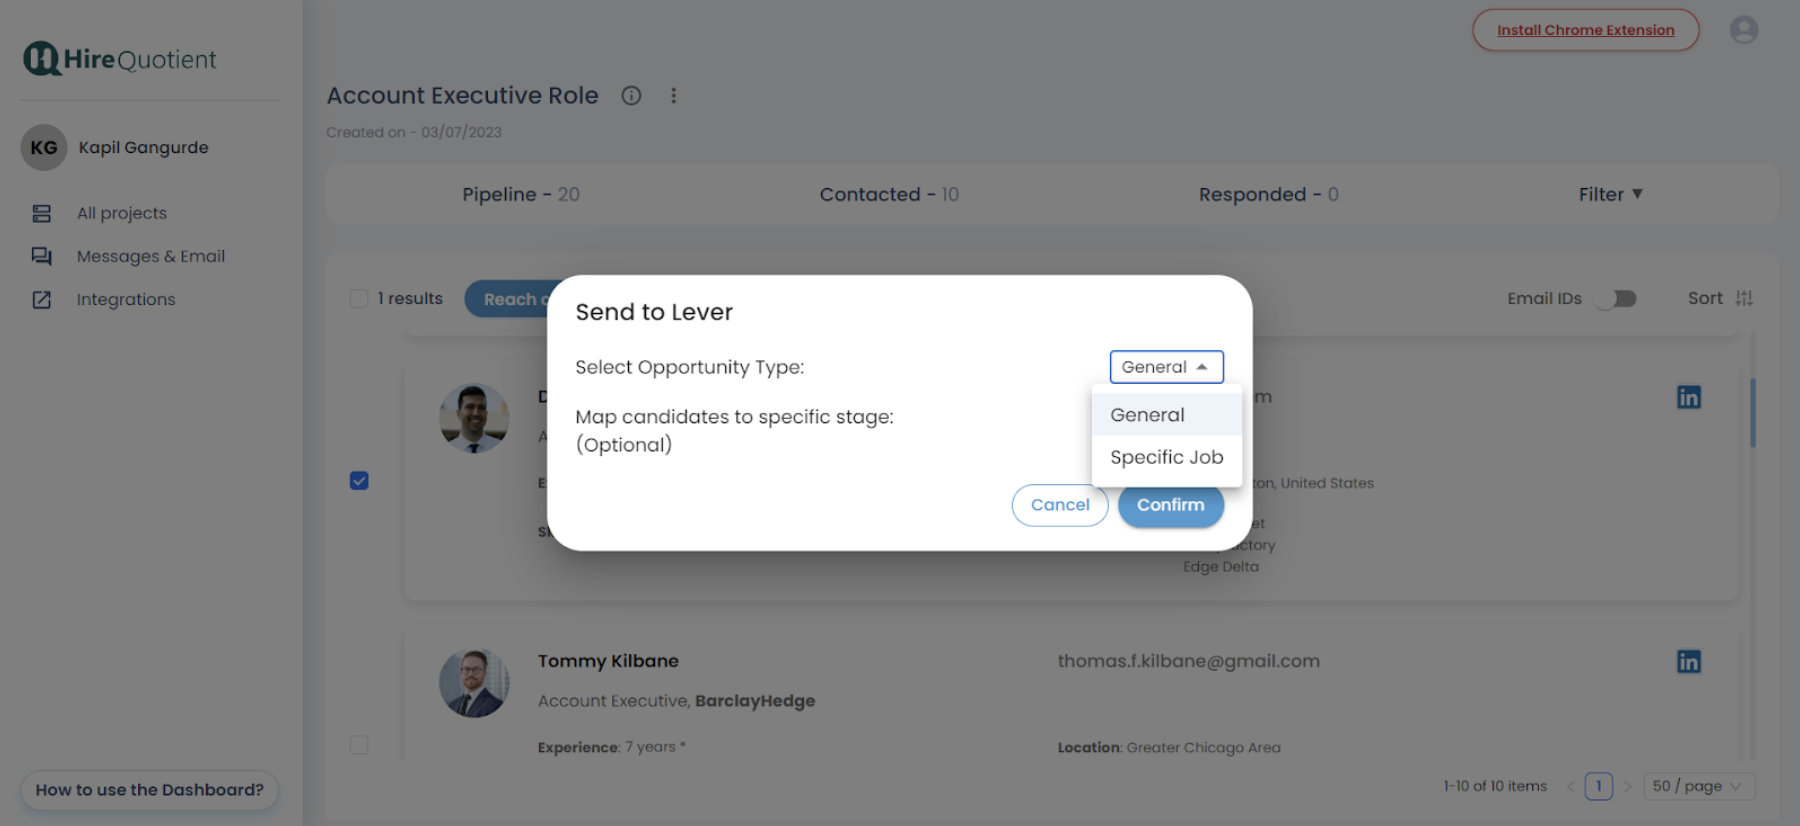 Send to Lever modal in EasySource with opportunity type menu expanded